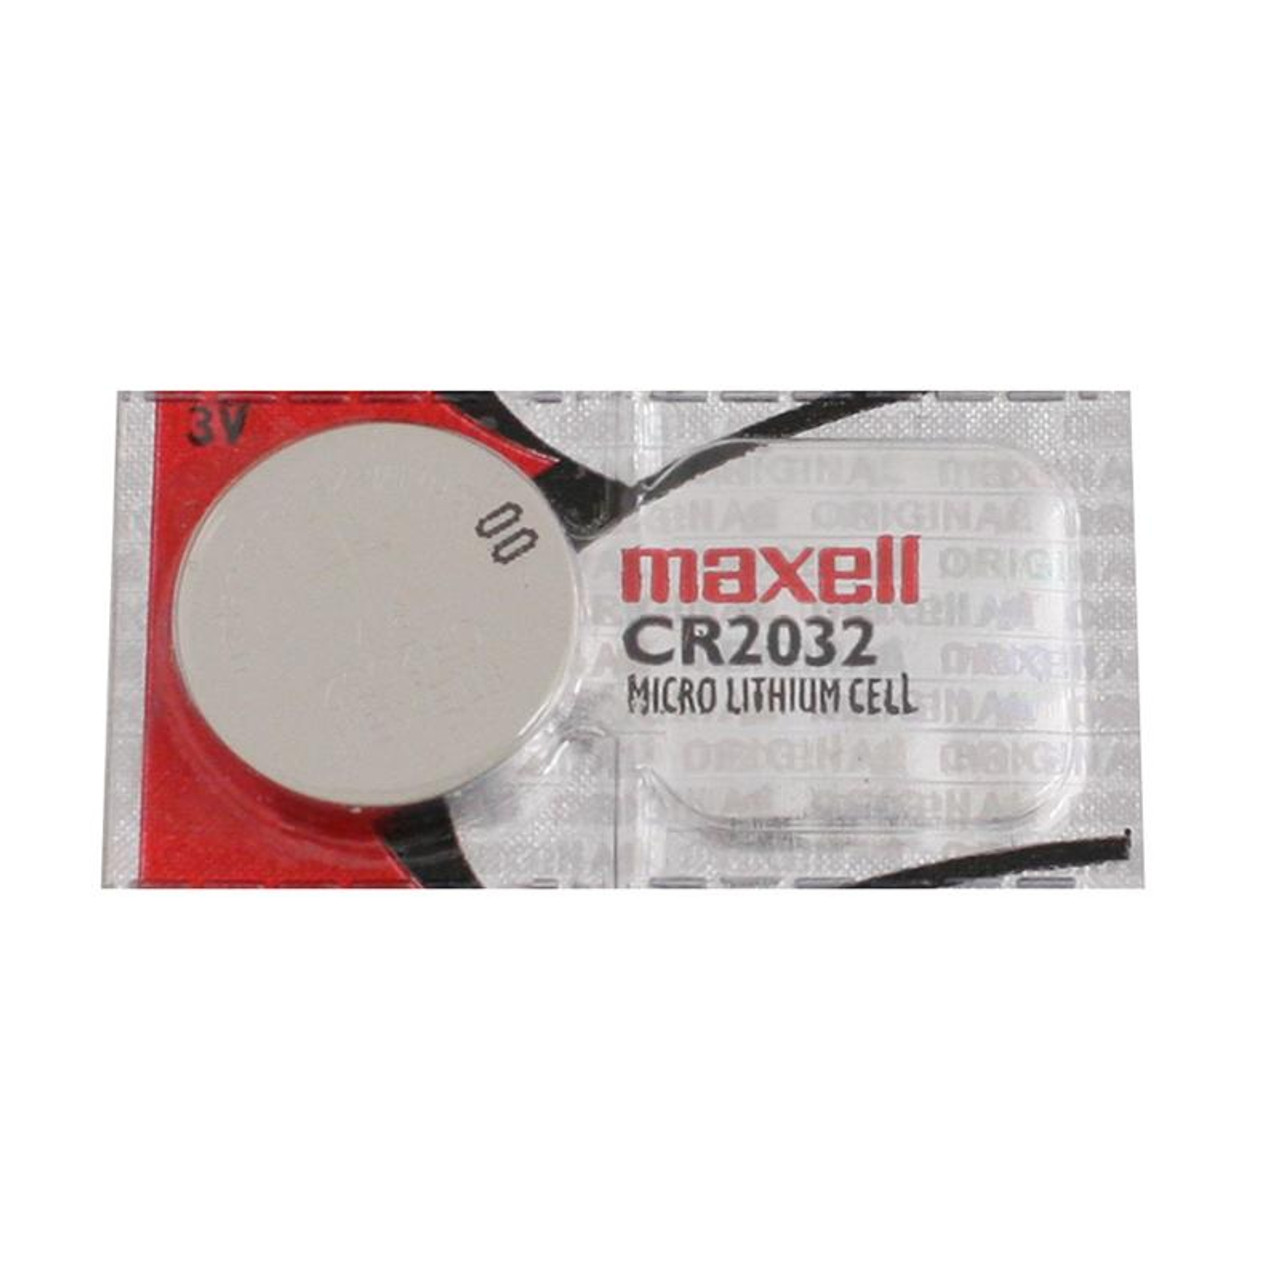 Cr2032 Battery Cross Reference Chart